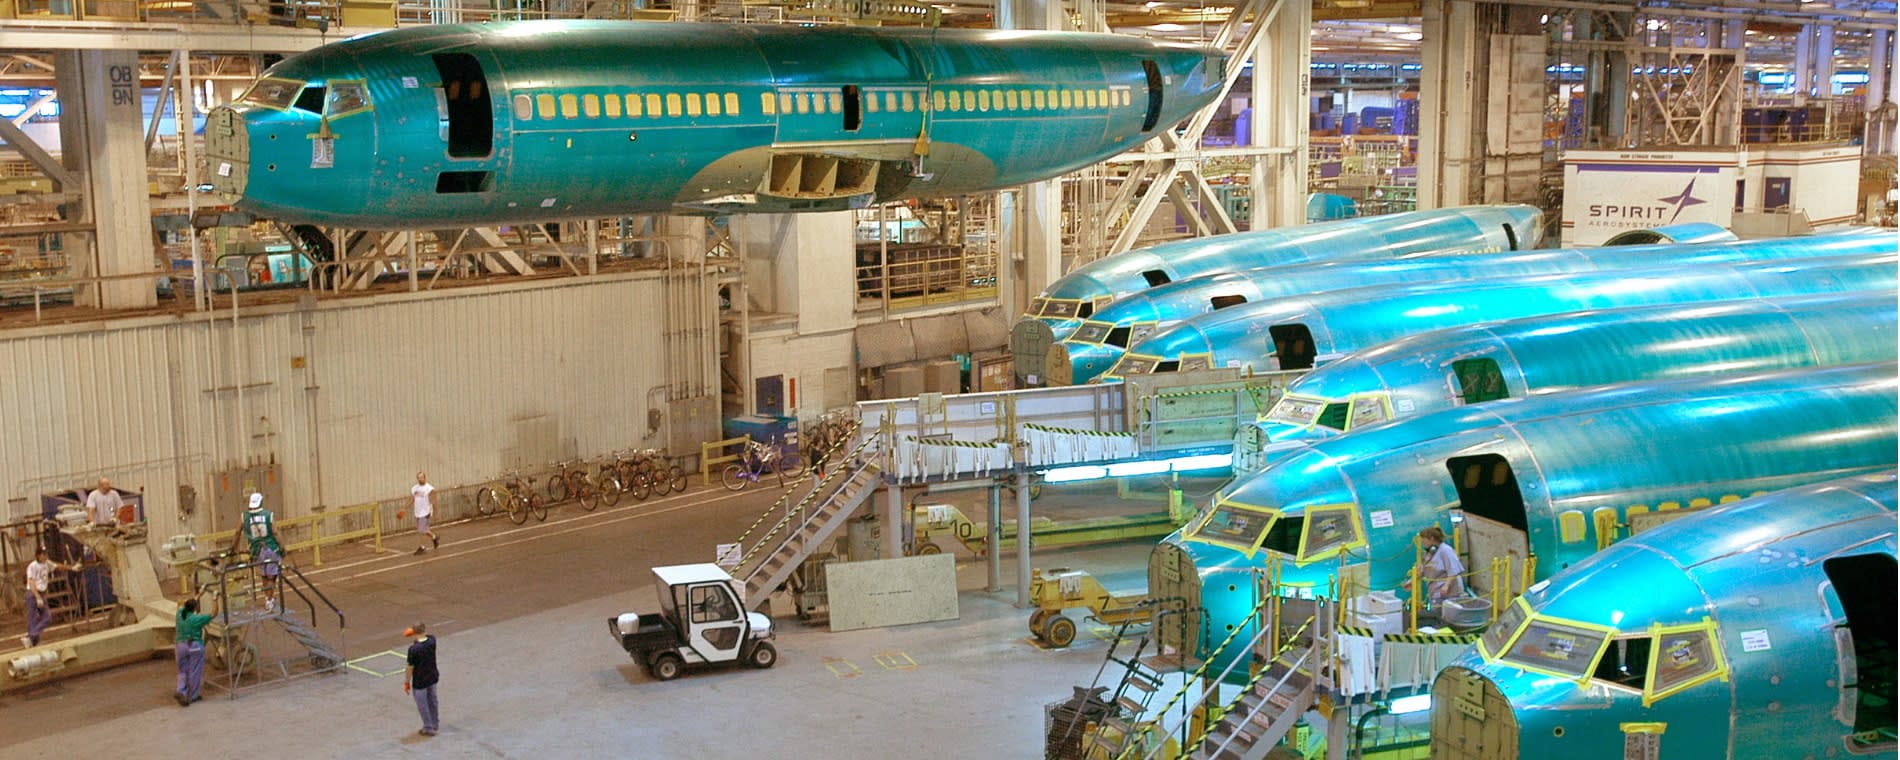 Boeing Back in Talks to Buy Spirit AeroSystems, But Will It Fix Quality Control?